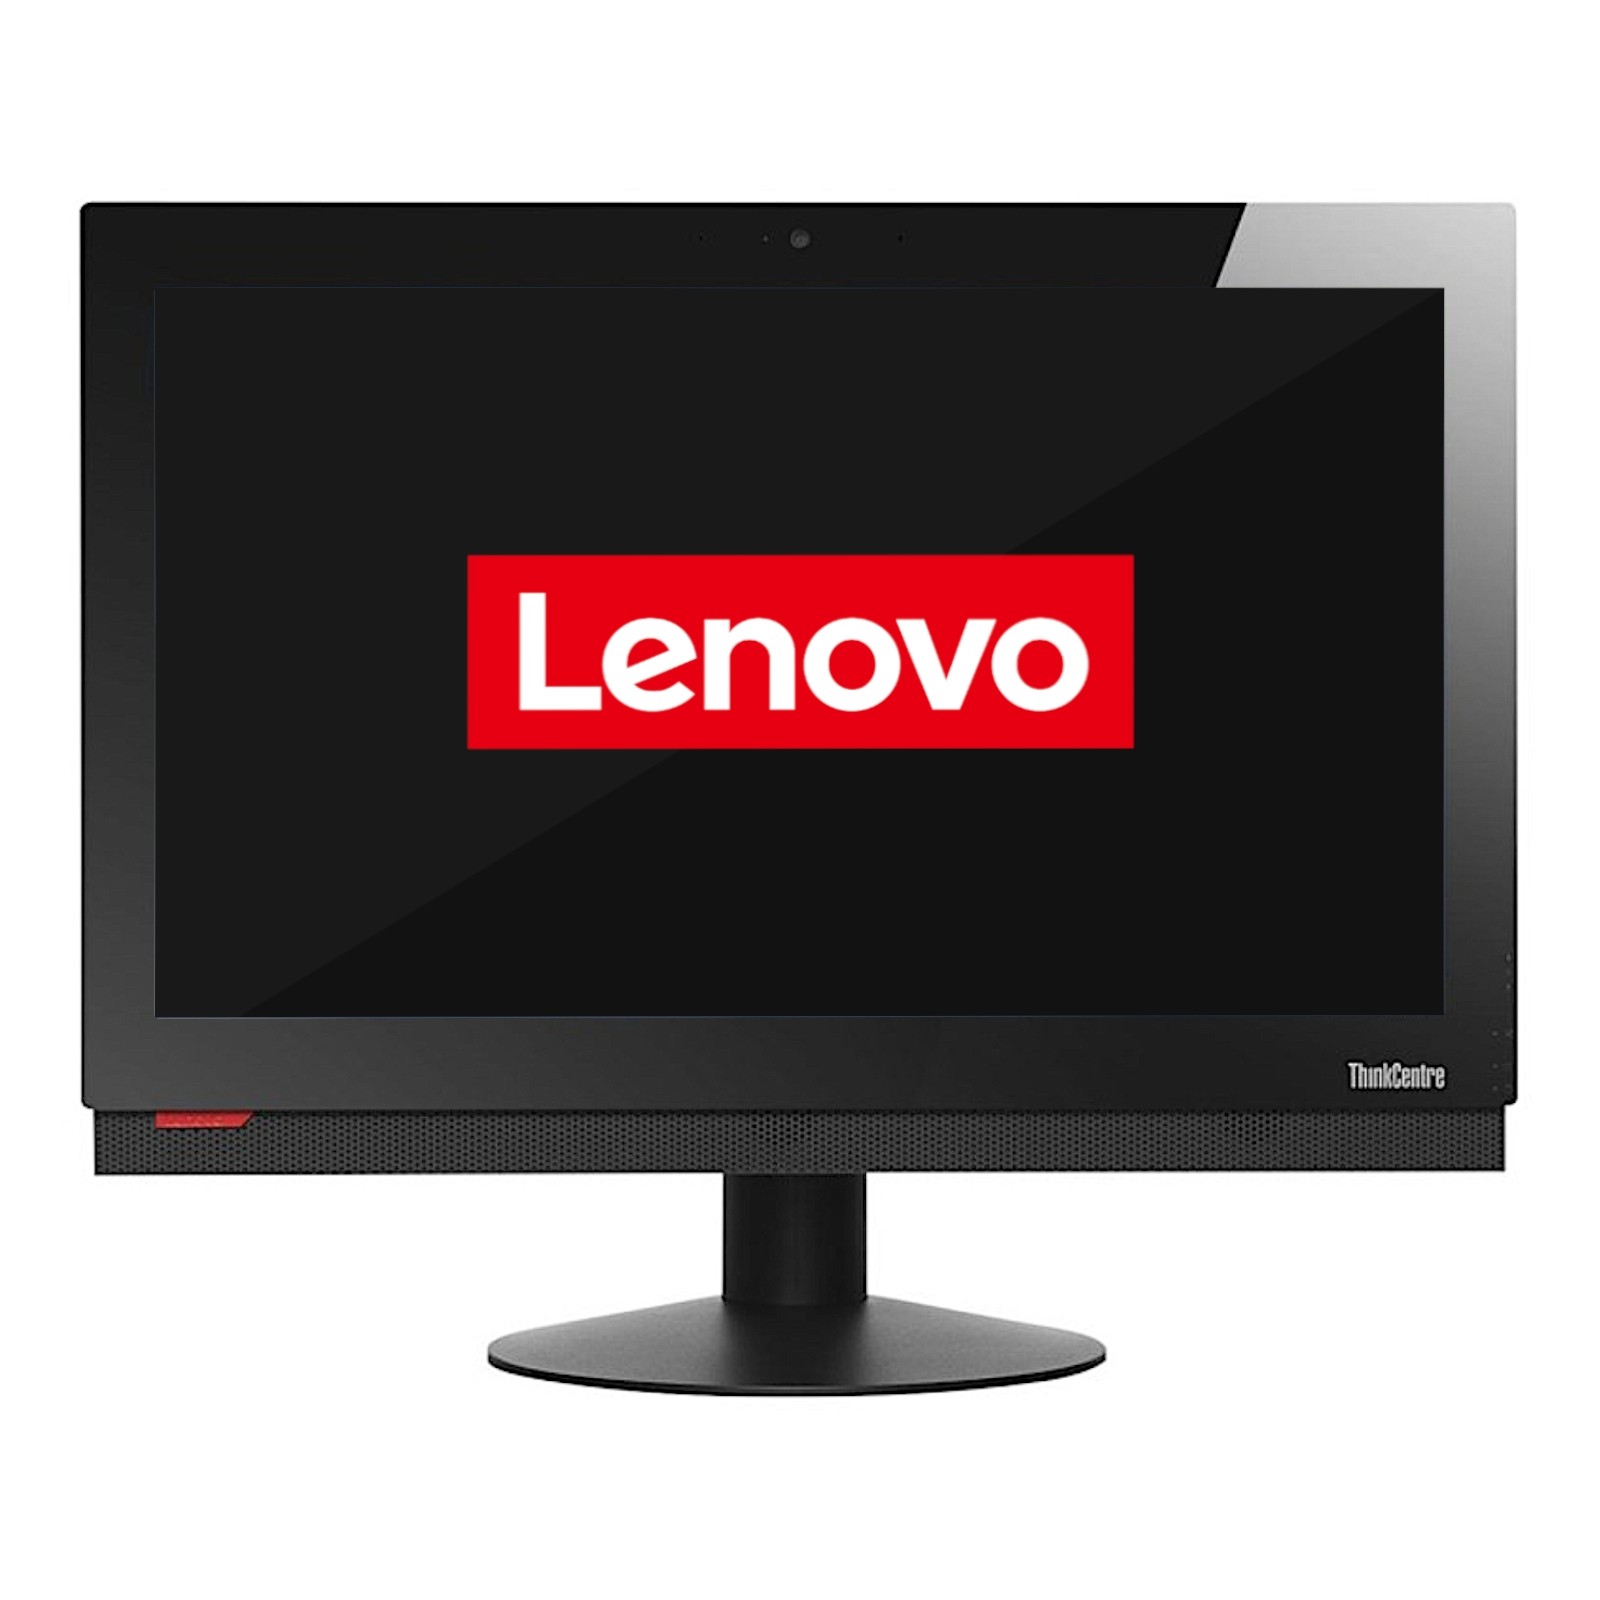 Lenovo ThinkCentre M810z 21.5 Inch All-in-One PC | Configure To Order